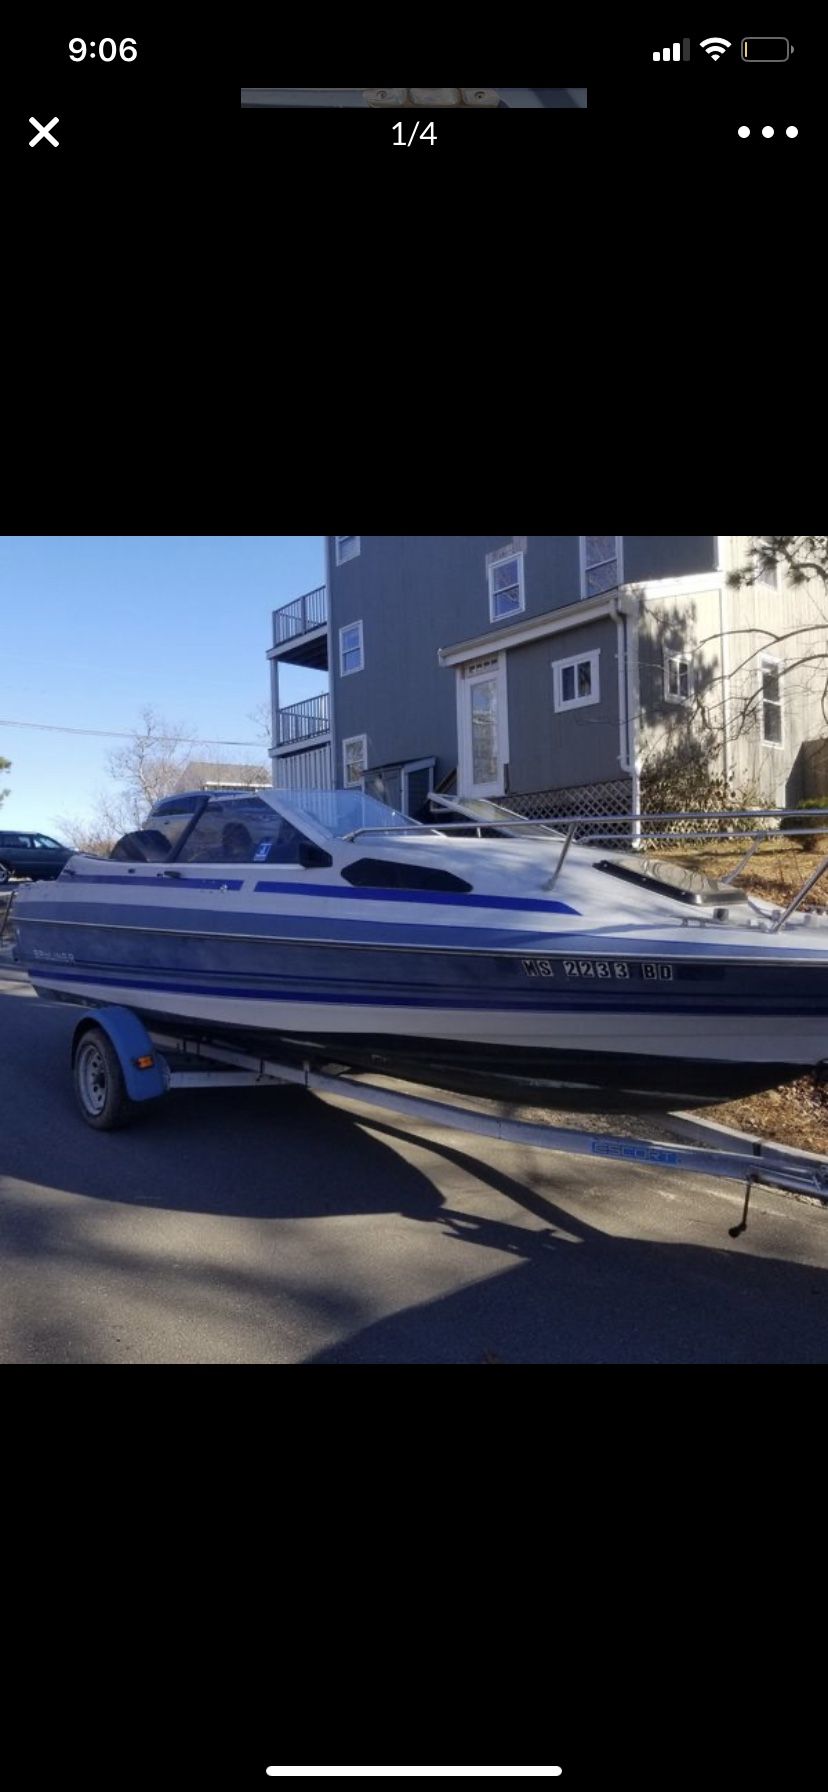 FREE BOAT AND TRAILER